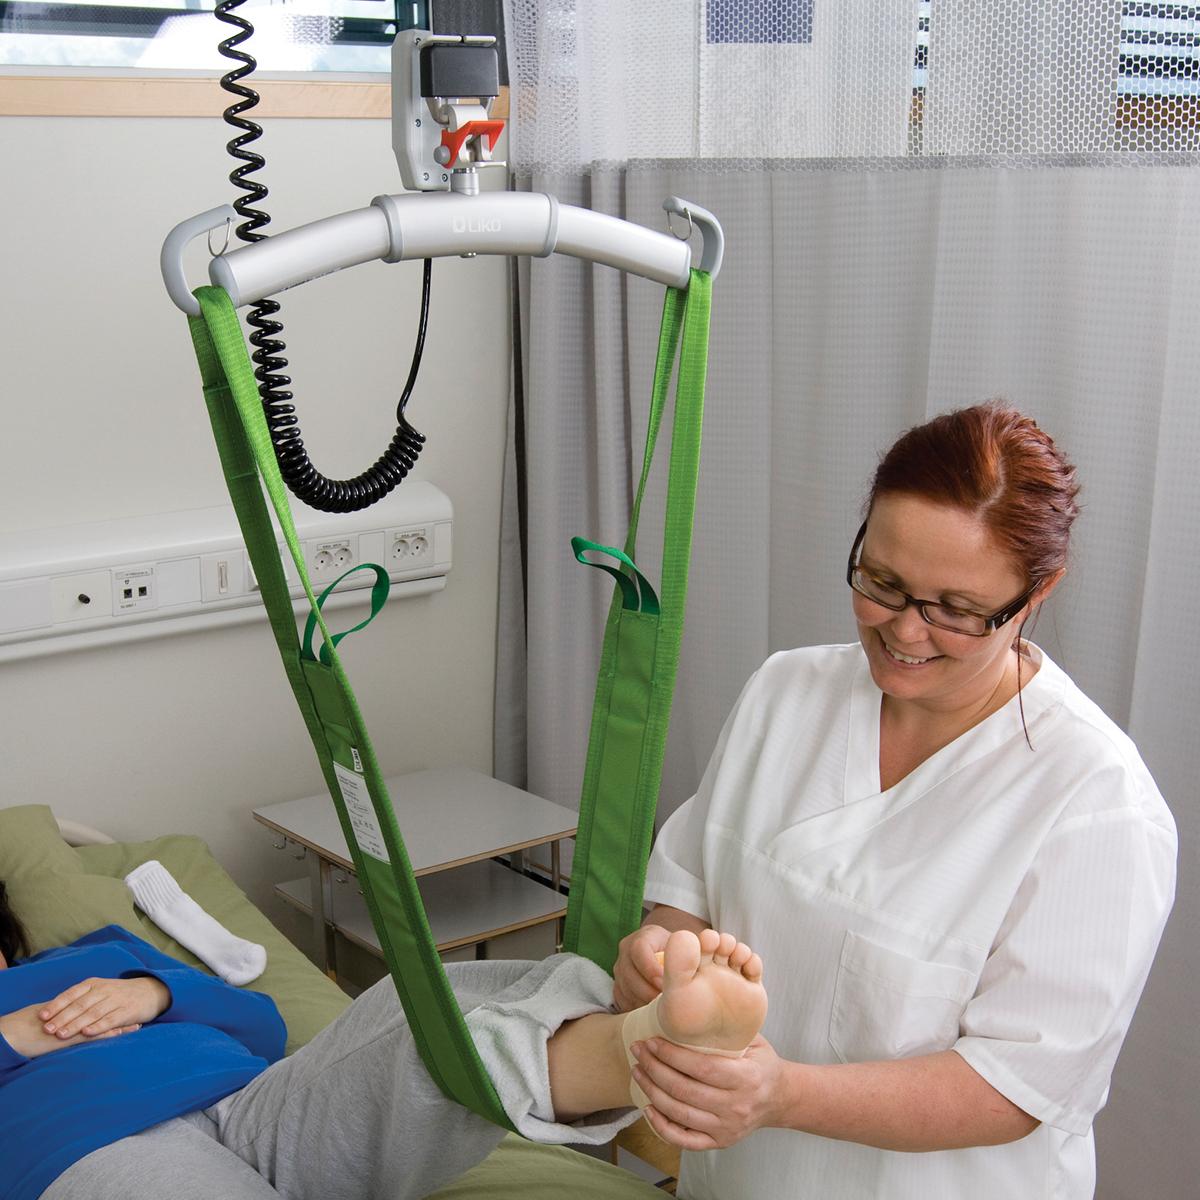 MultiStrap™ Lift Aid, green, in use with reclined patient's left foot in strap, held by female clinican in glasses